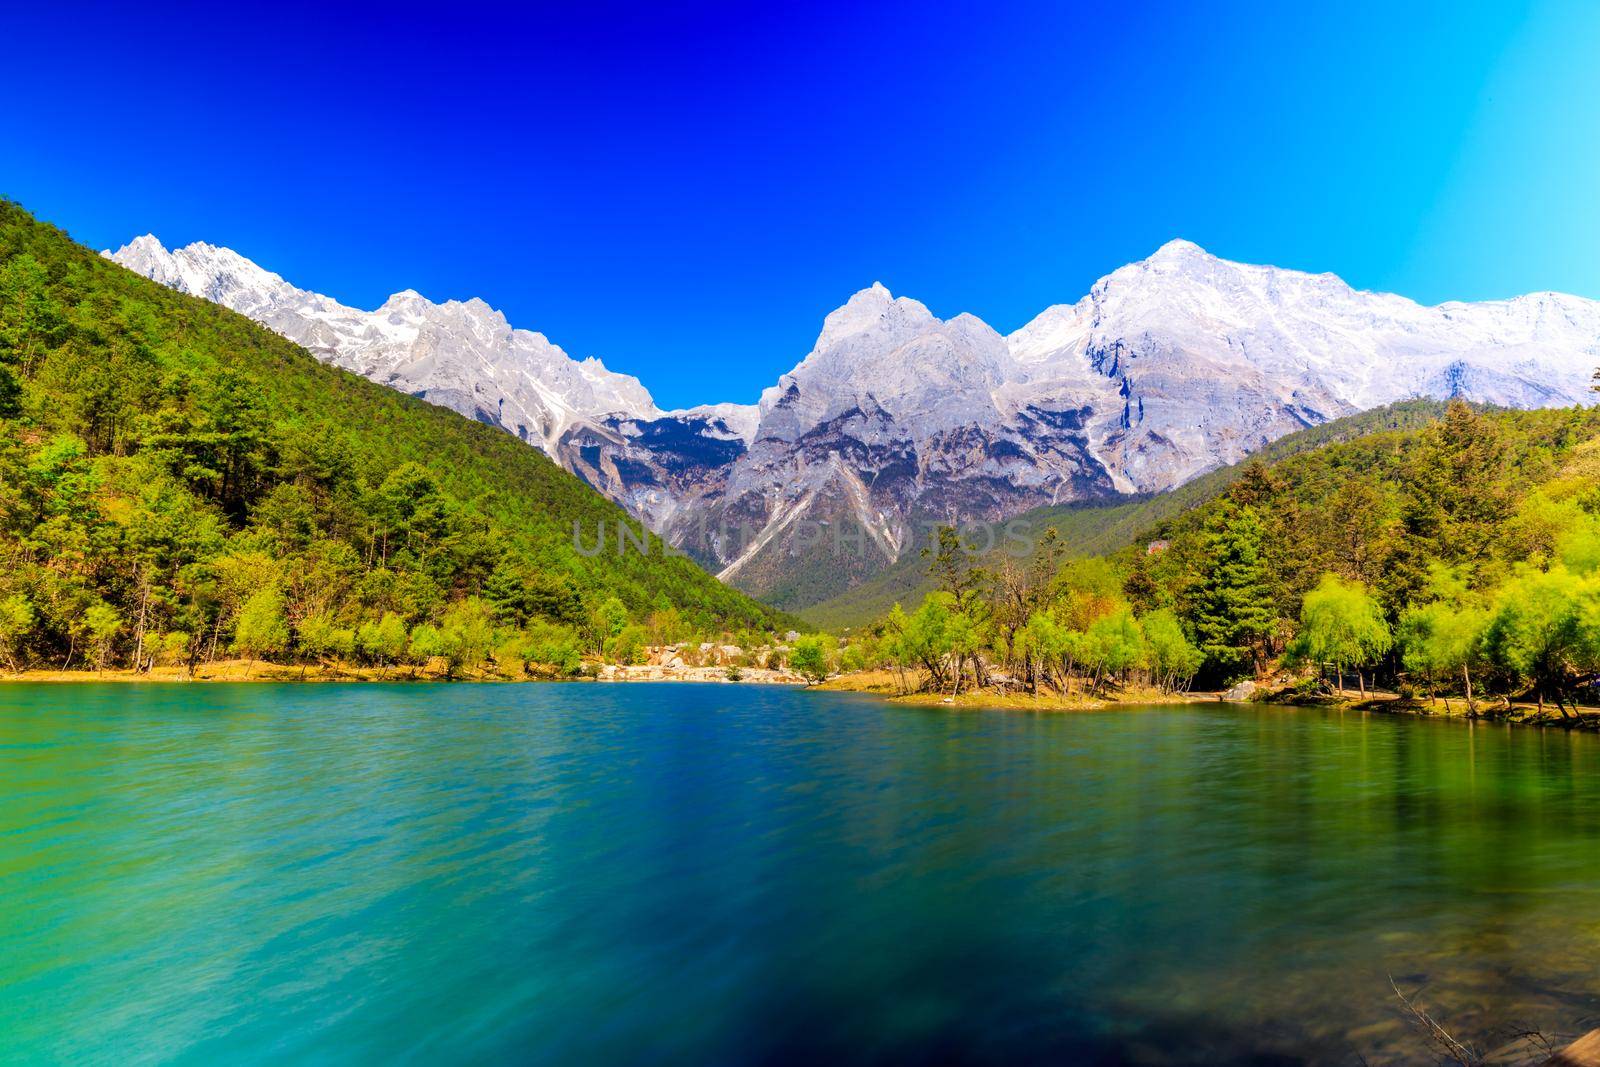 A view of a river and Jade Dragon Snow Mountain in Lijiang (Southwest China).